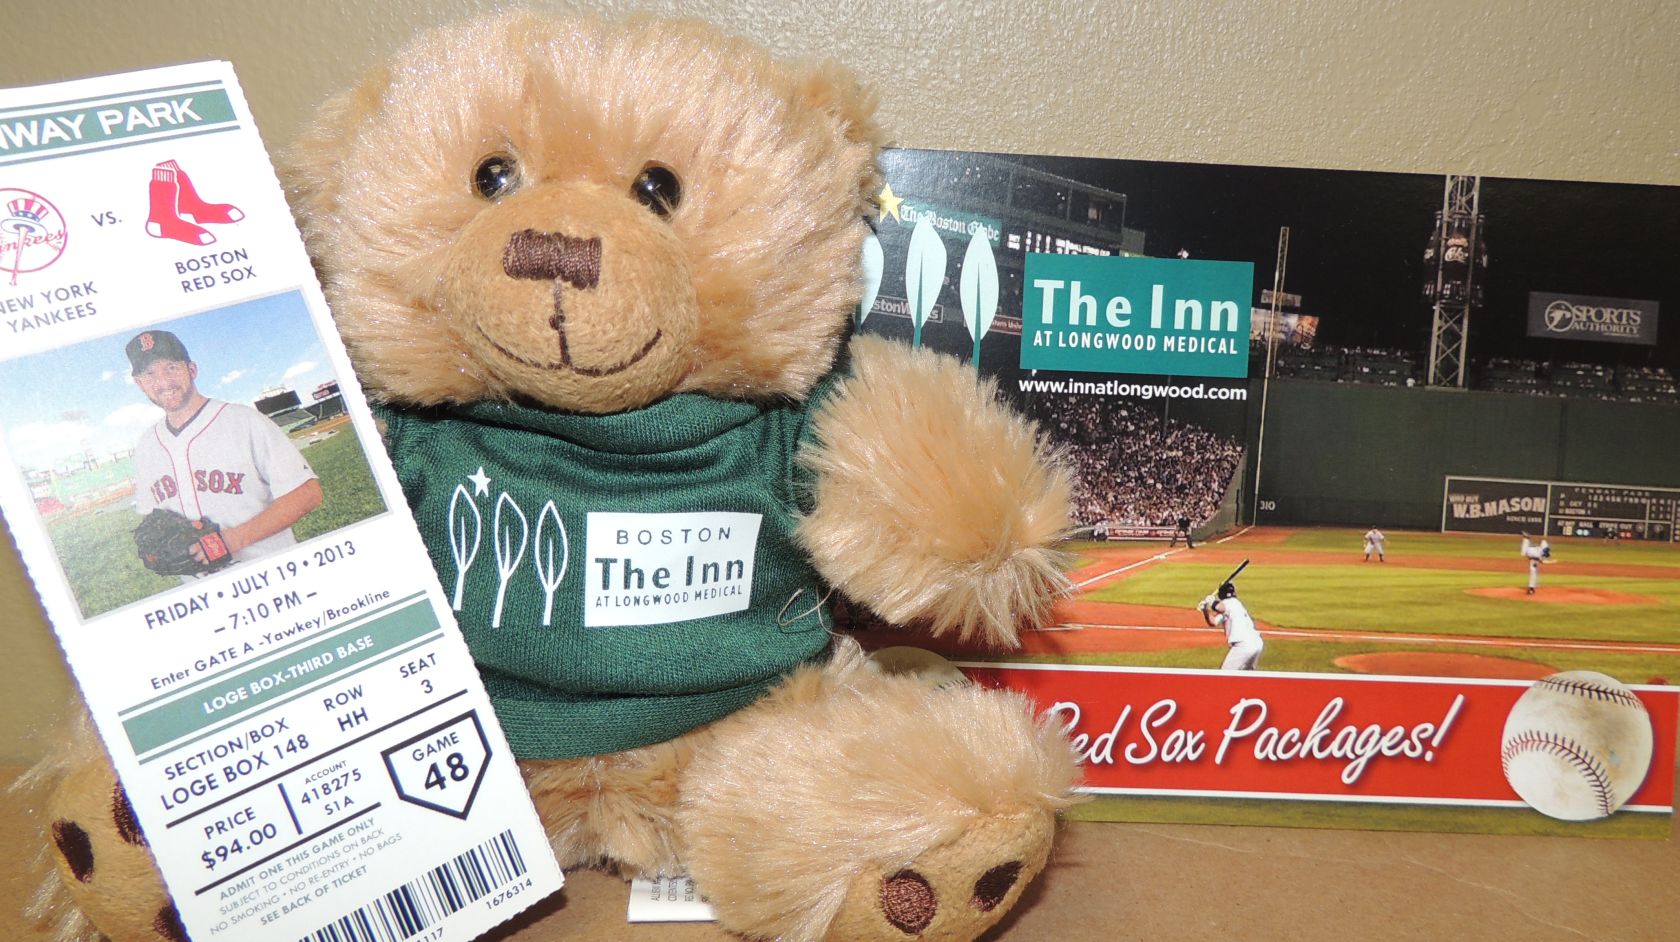 Hope the bear and baseball tickets promo for Inn at Longwood Medical in Boston